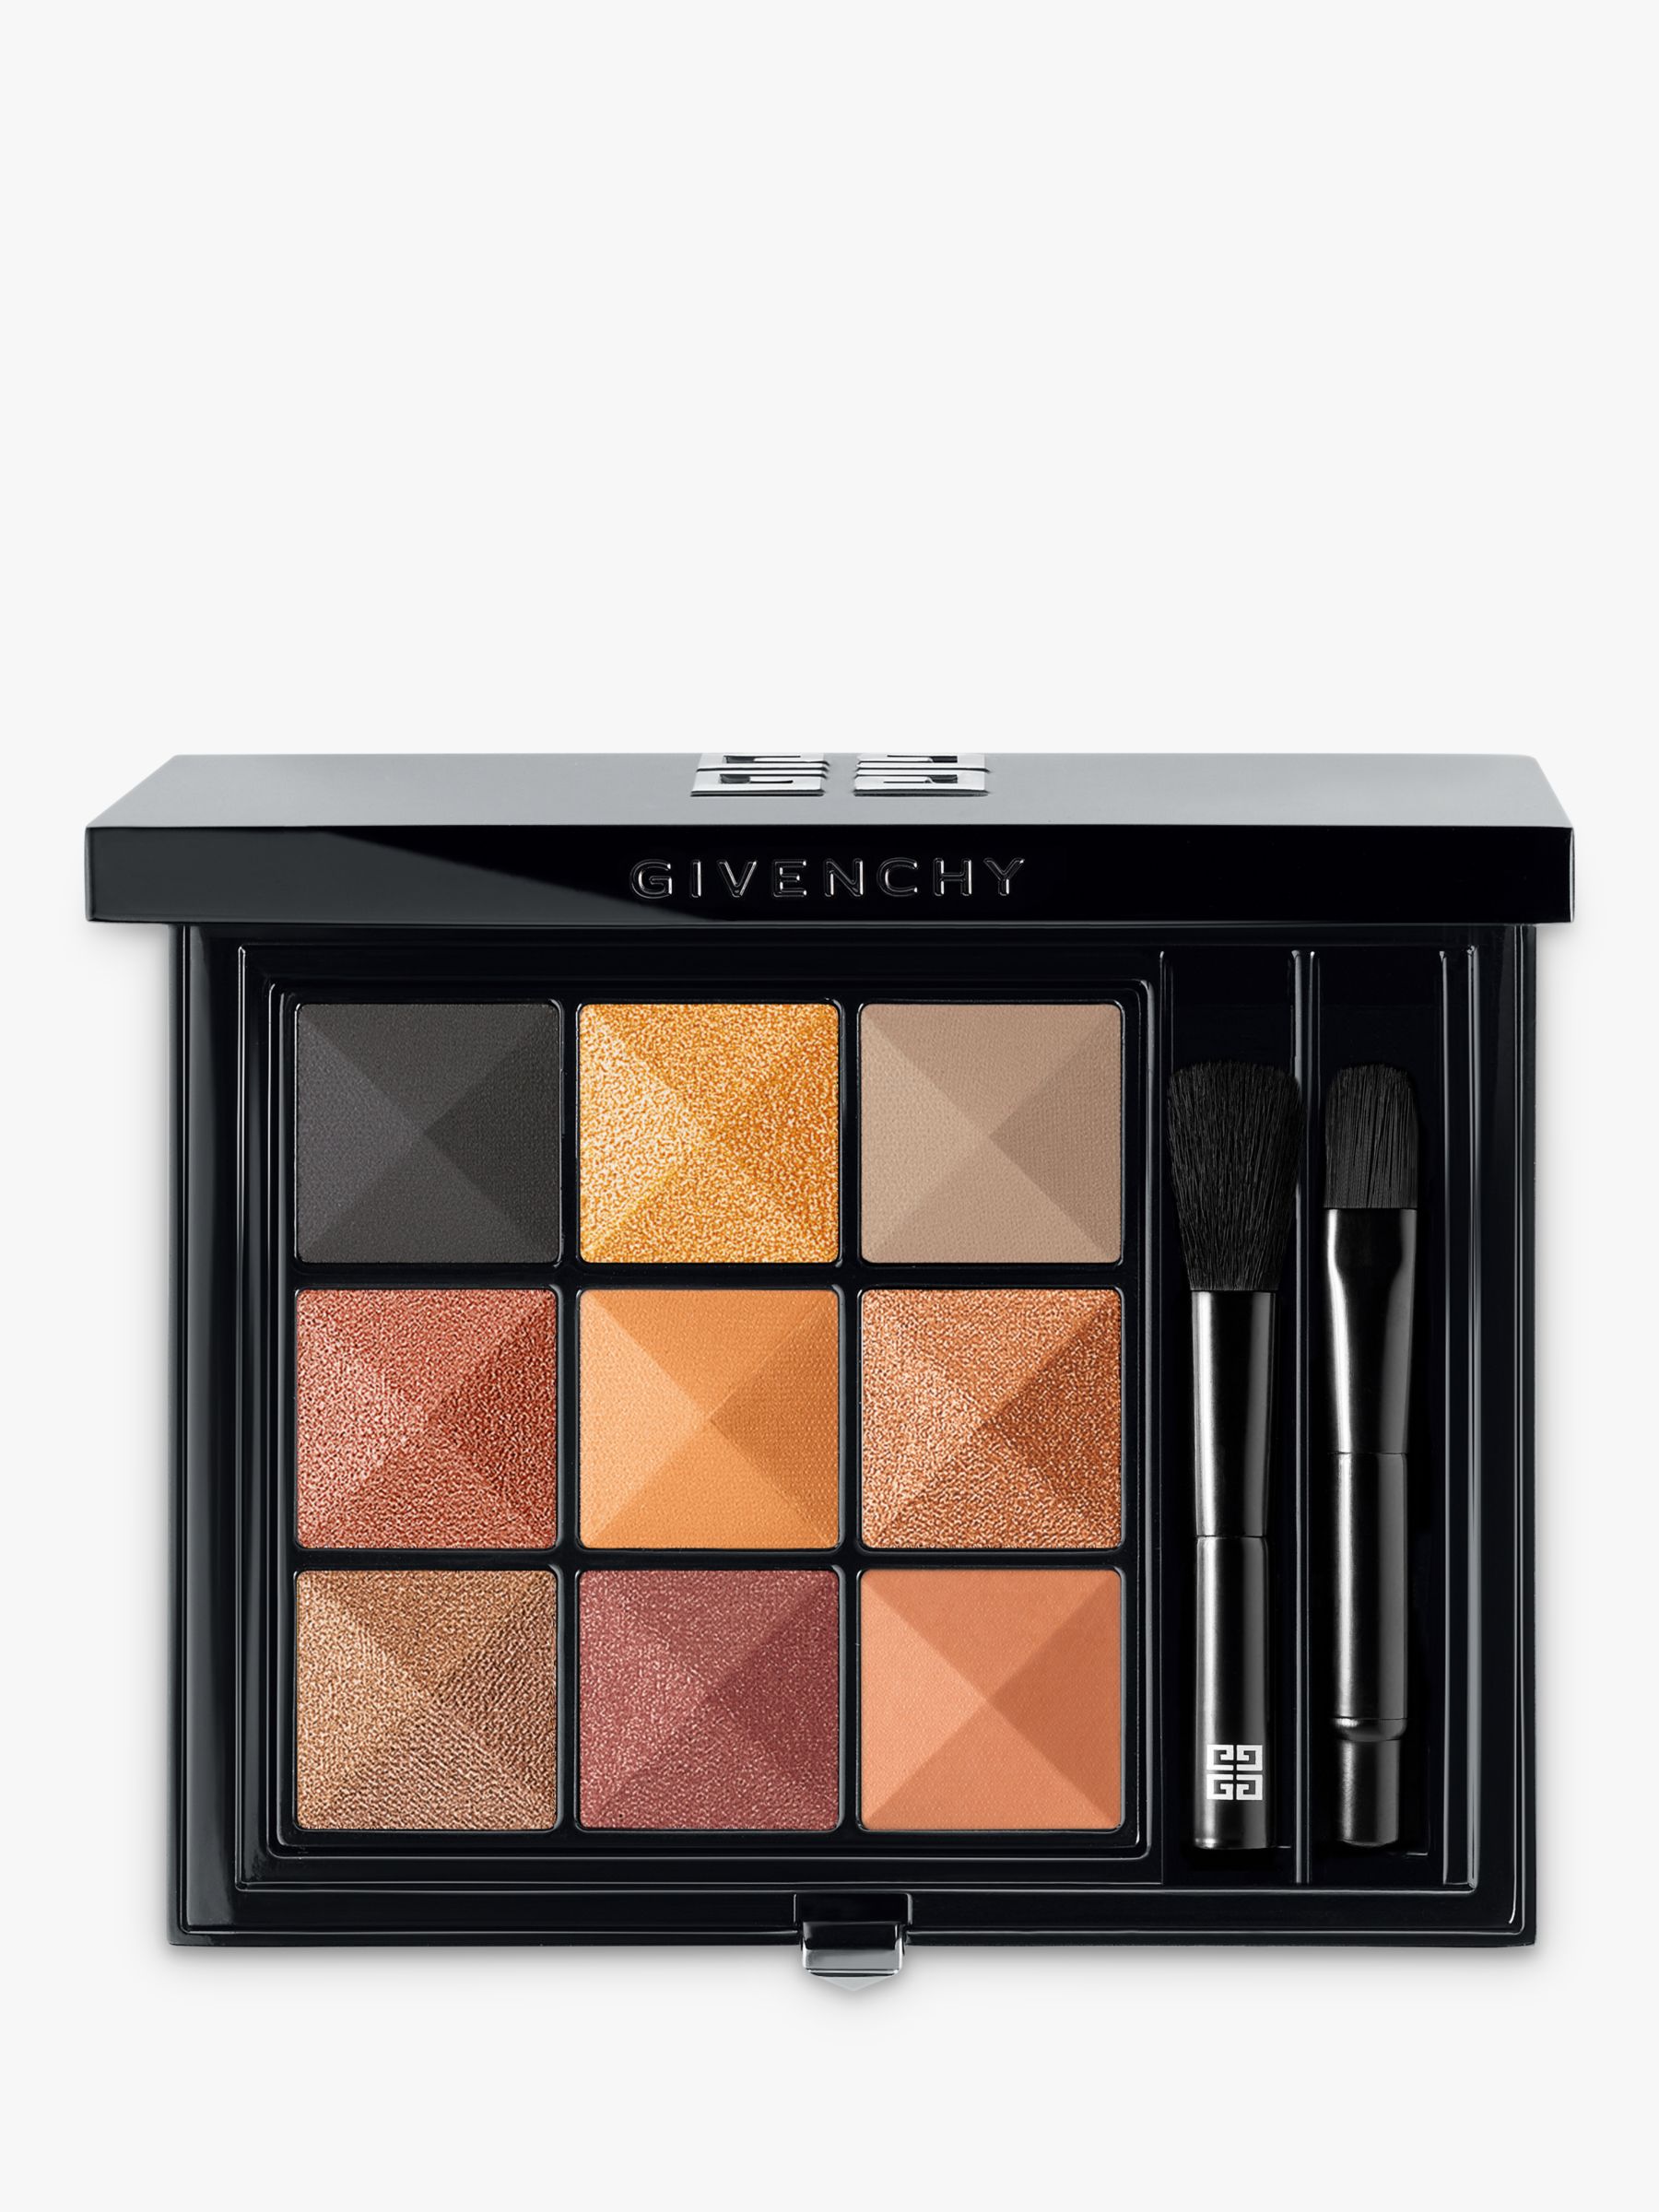 Givenchy Le 9 de Givenchy Multi-Finish Eyeshadow Palette,  at John  Lewis & Partners